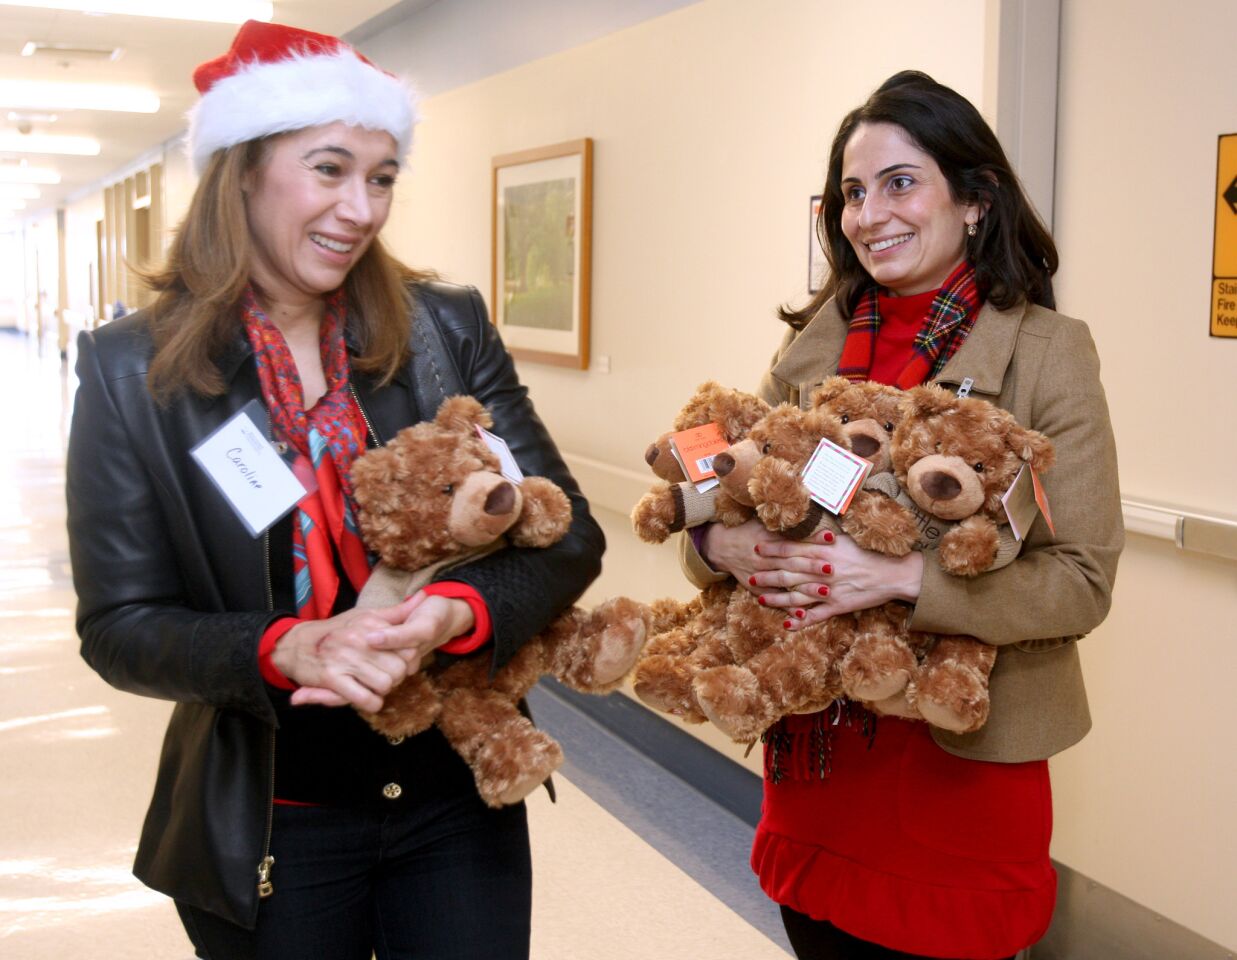 Volunteer Caroline Tufenkian, left, and Glendale Adventist Medical Center director of marketing Alina Dersarkissian, right, helped pass out teddy bears to patients for the holidays, at GAMC in Glendale on Wednesday, December 23, 2015. Sixty stuffed bears from Bloomingdale's were handed out to patients throughout the hospital. A donor gave 30 bears and Bloomingdale's match the gift with another 30 bears.